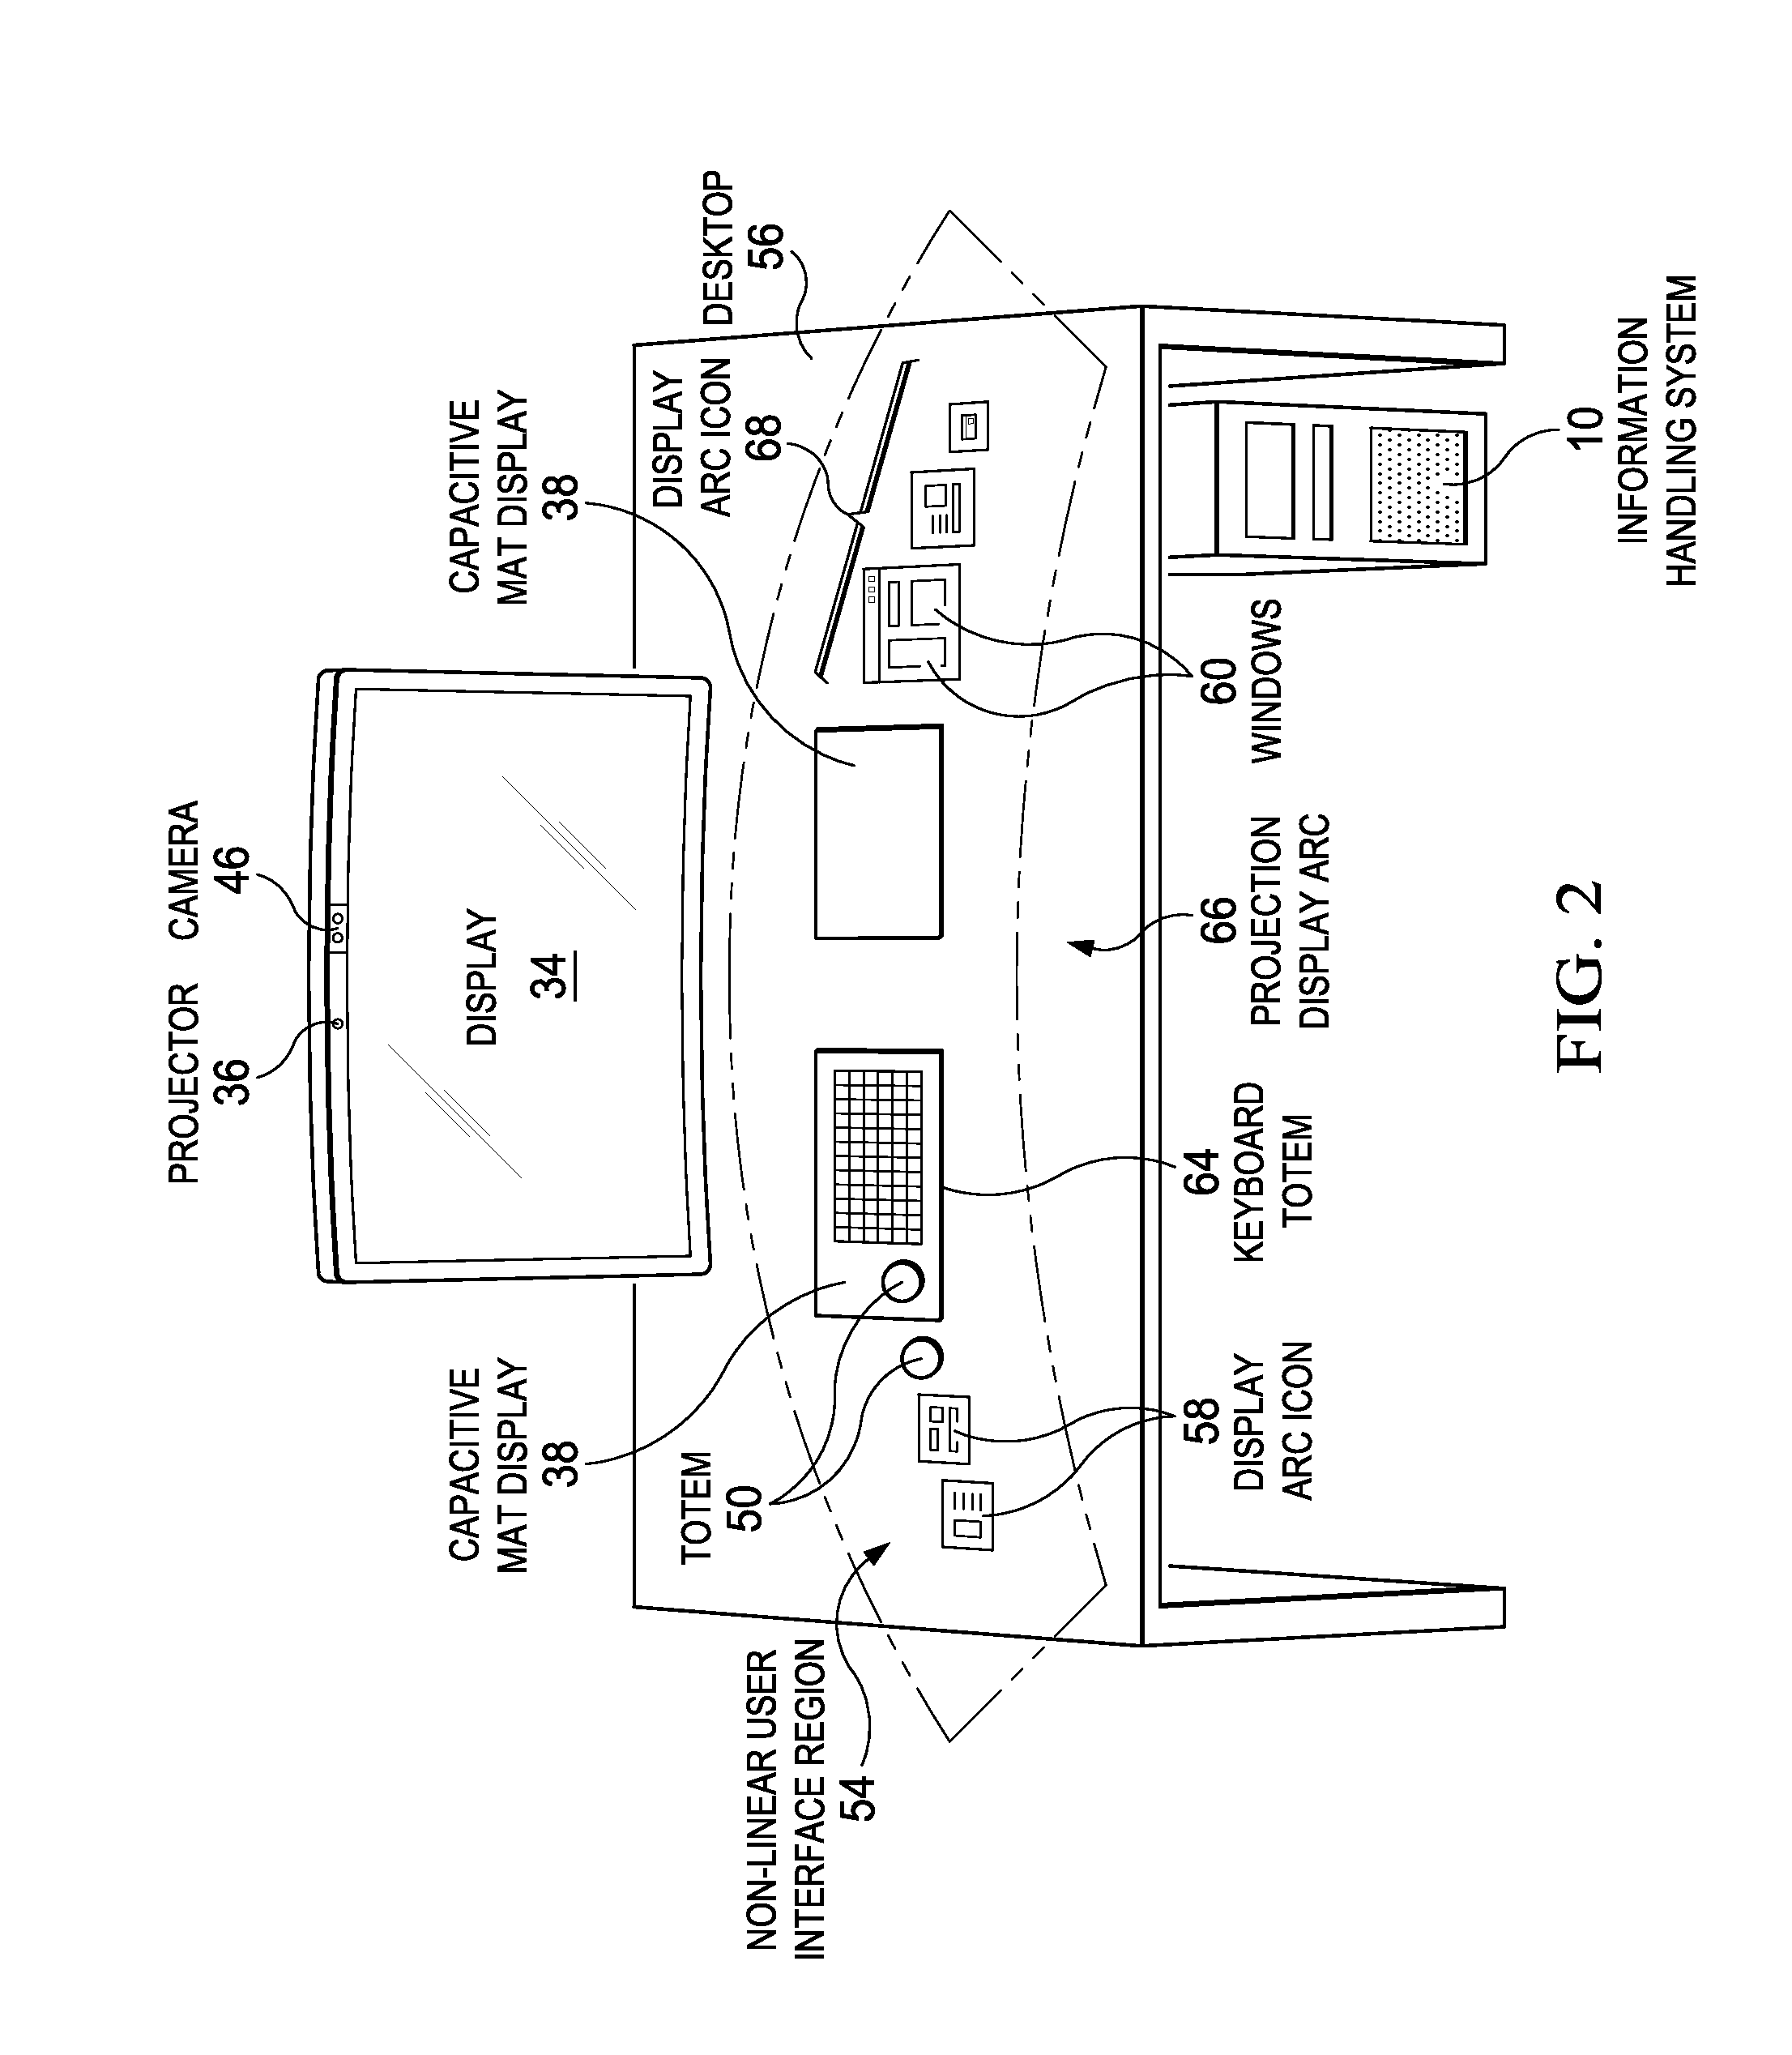 Dynamic Display Resolution Management for an Immersed Information Handling System Environment